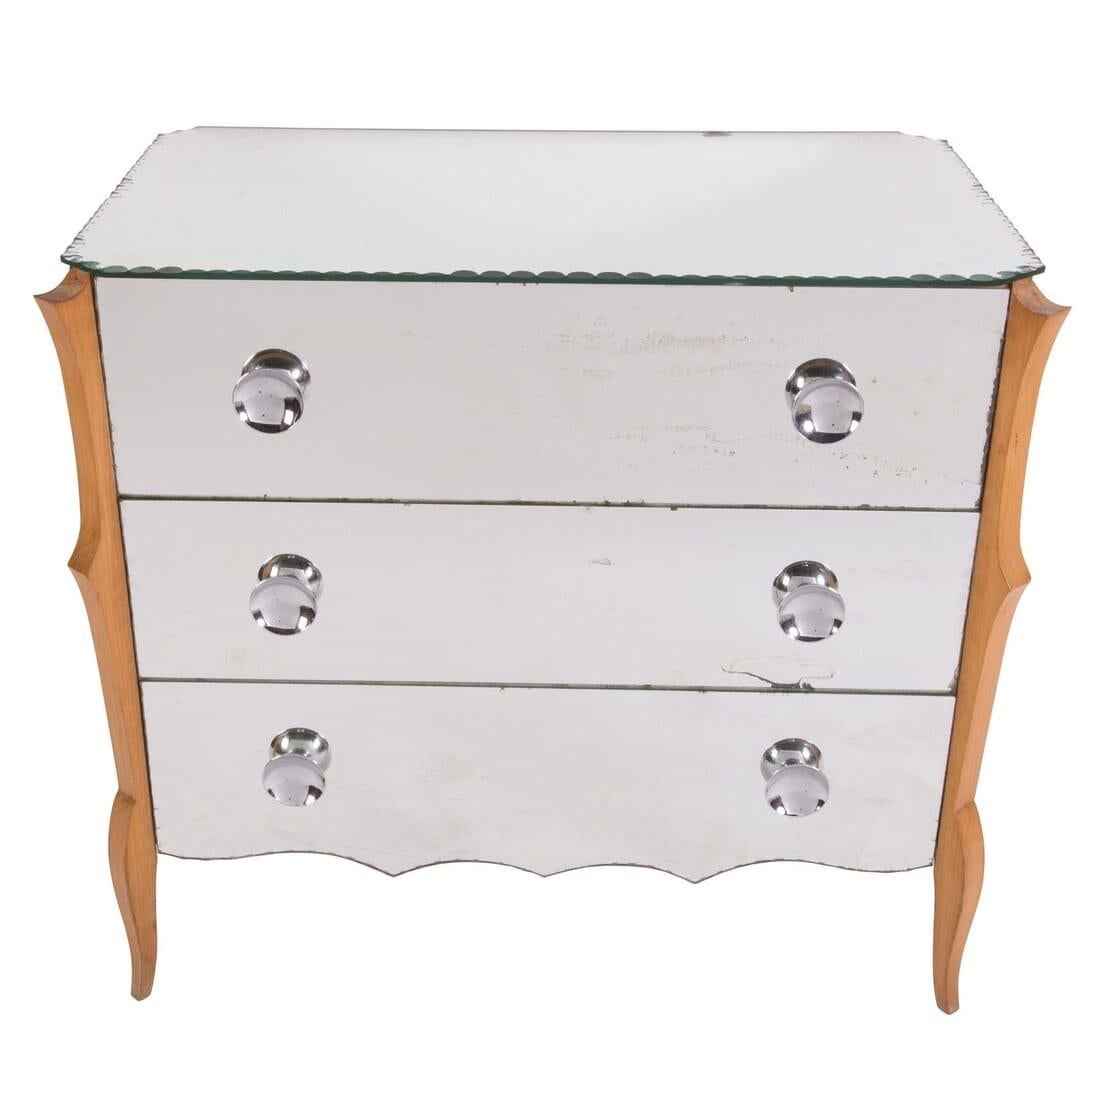 Mid-20th century French mirrored chest with scalloped decoration, circa 1960.